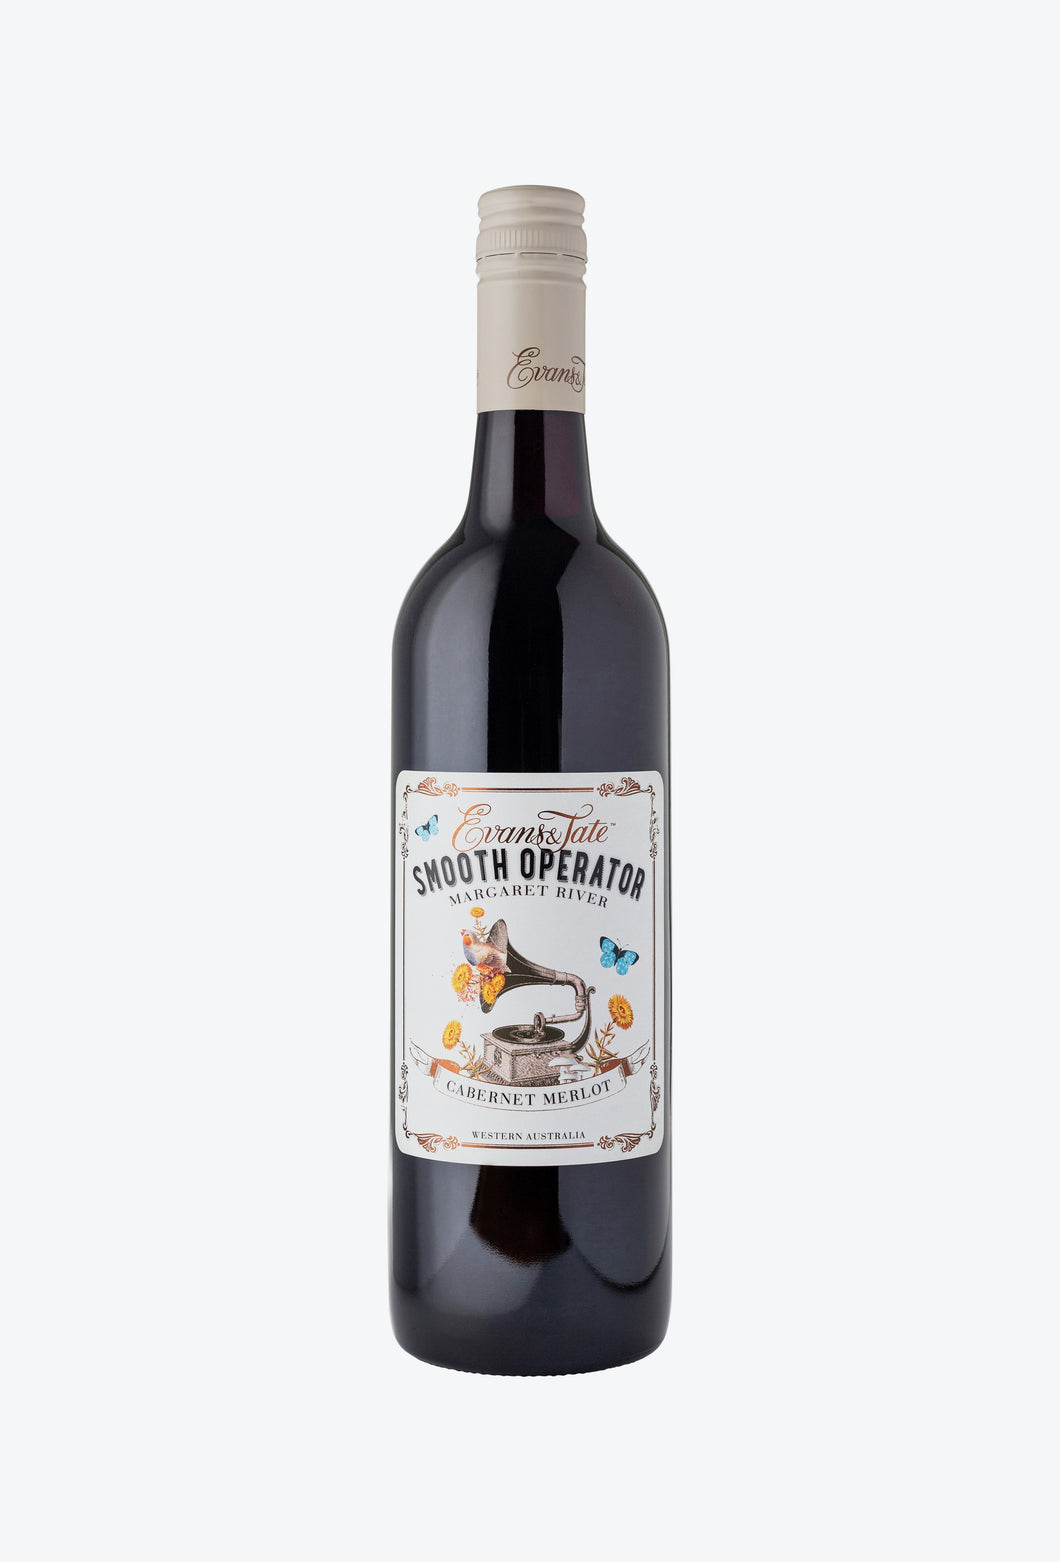 2021 Expressions Smooth Operator Cabernet Merlot